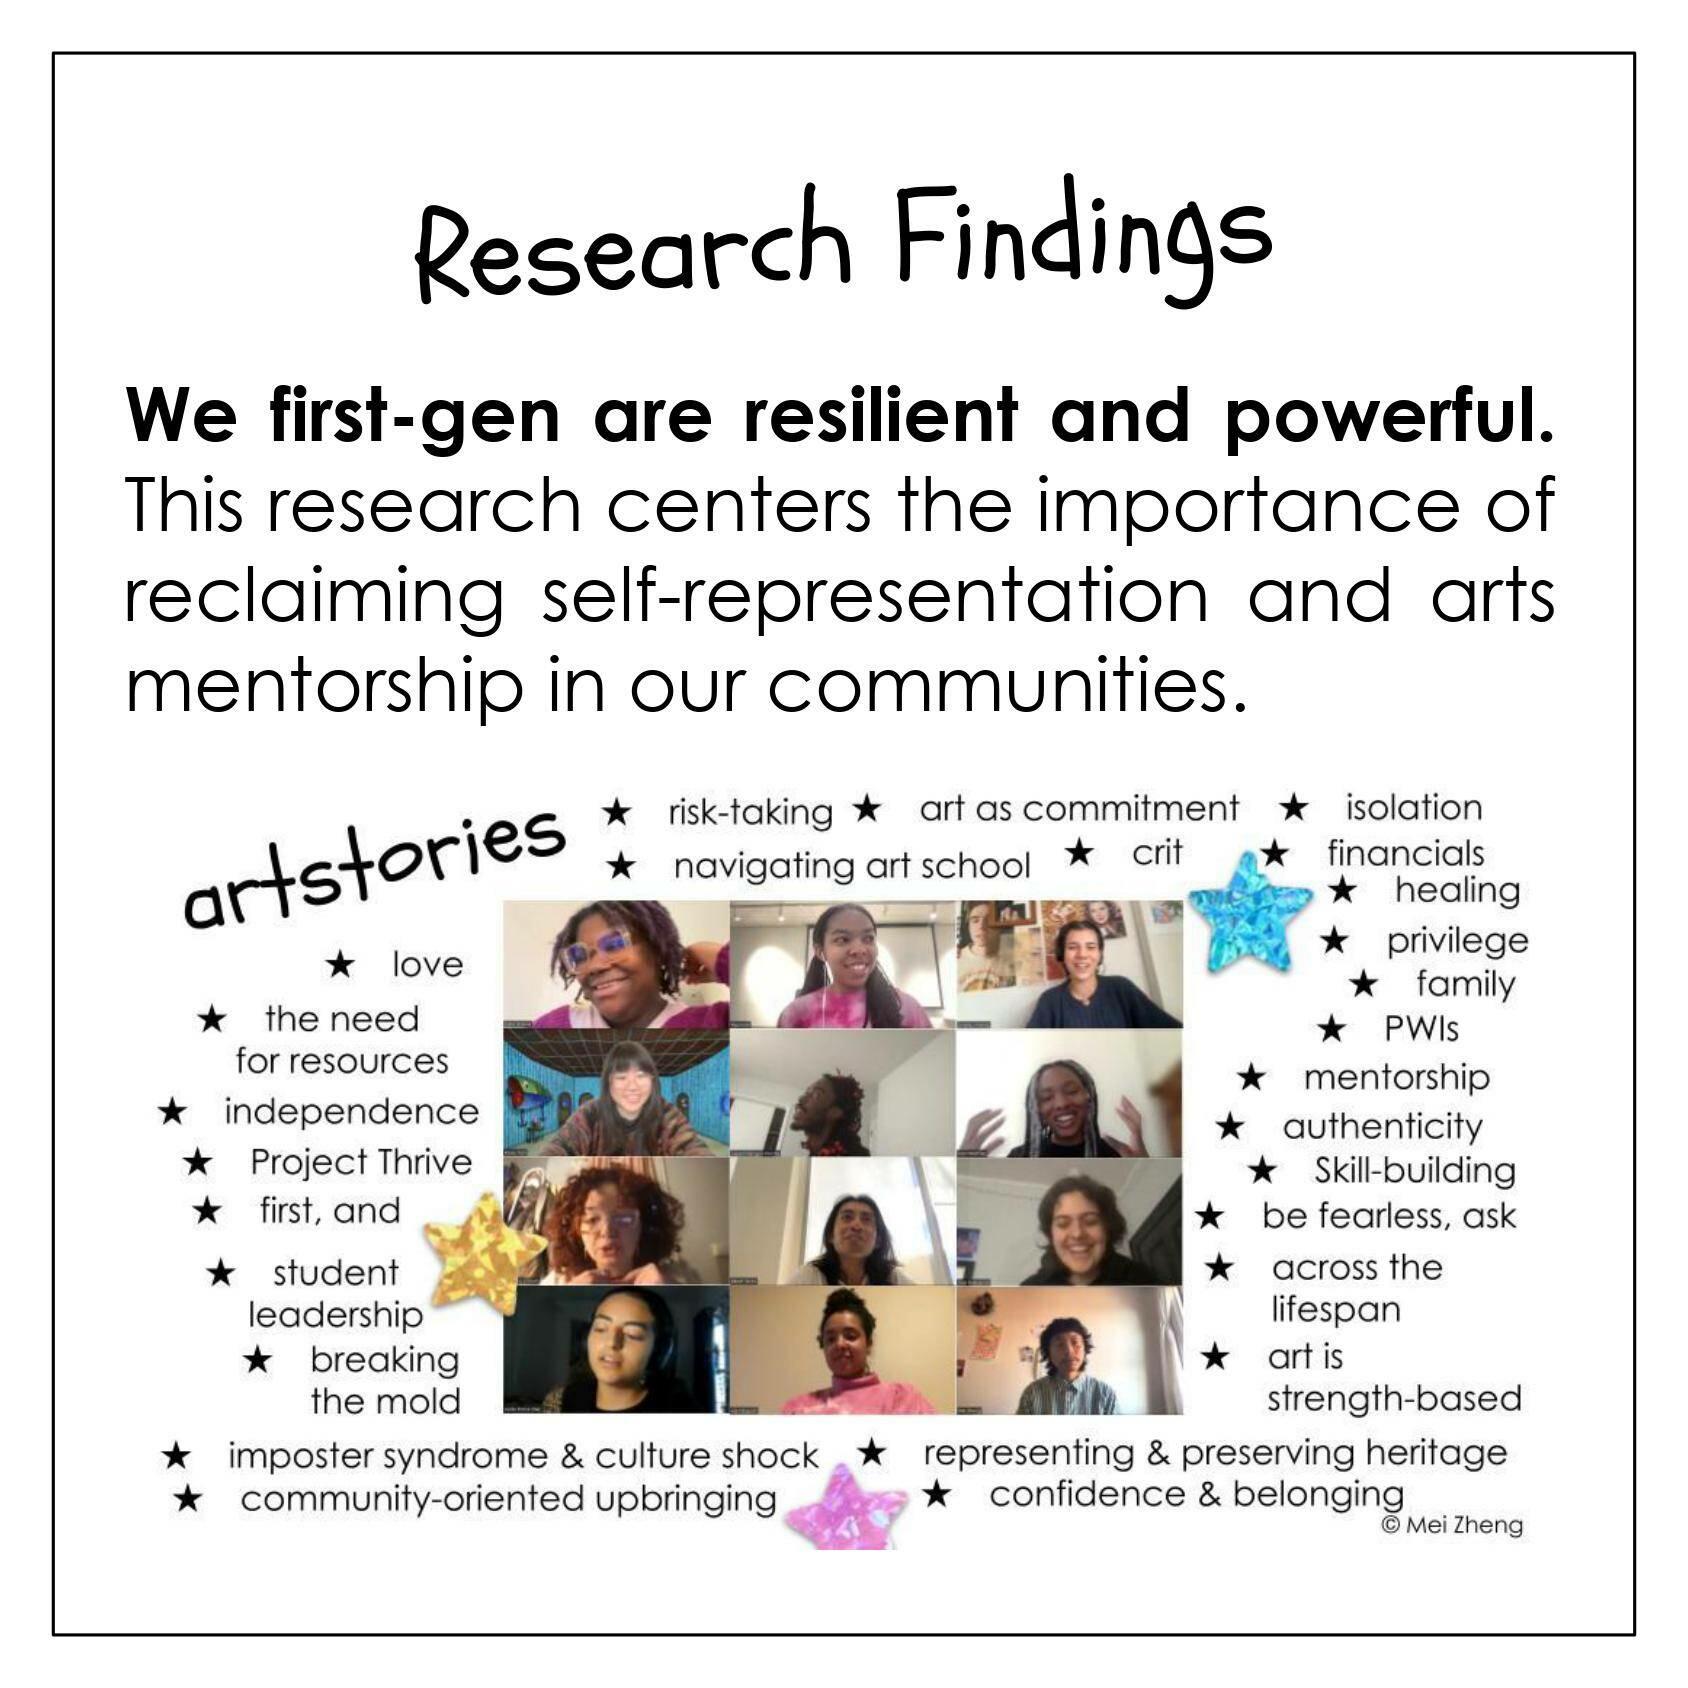 An image titled "Research Findings" highlights the resilience of first-generation people. It emphasizes self-representation and arts mentorship. Features a collage of keywords such as mentorship, anti-deficit, self-advocacy, and community, with various photos of participants and stickers.